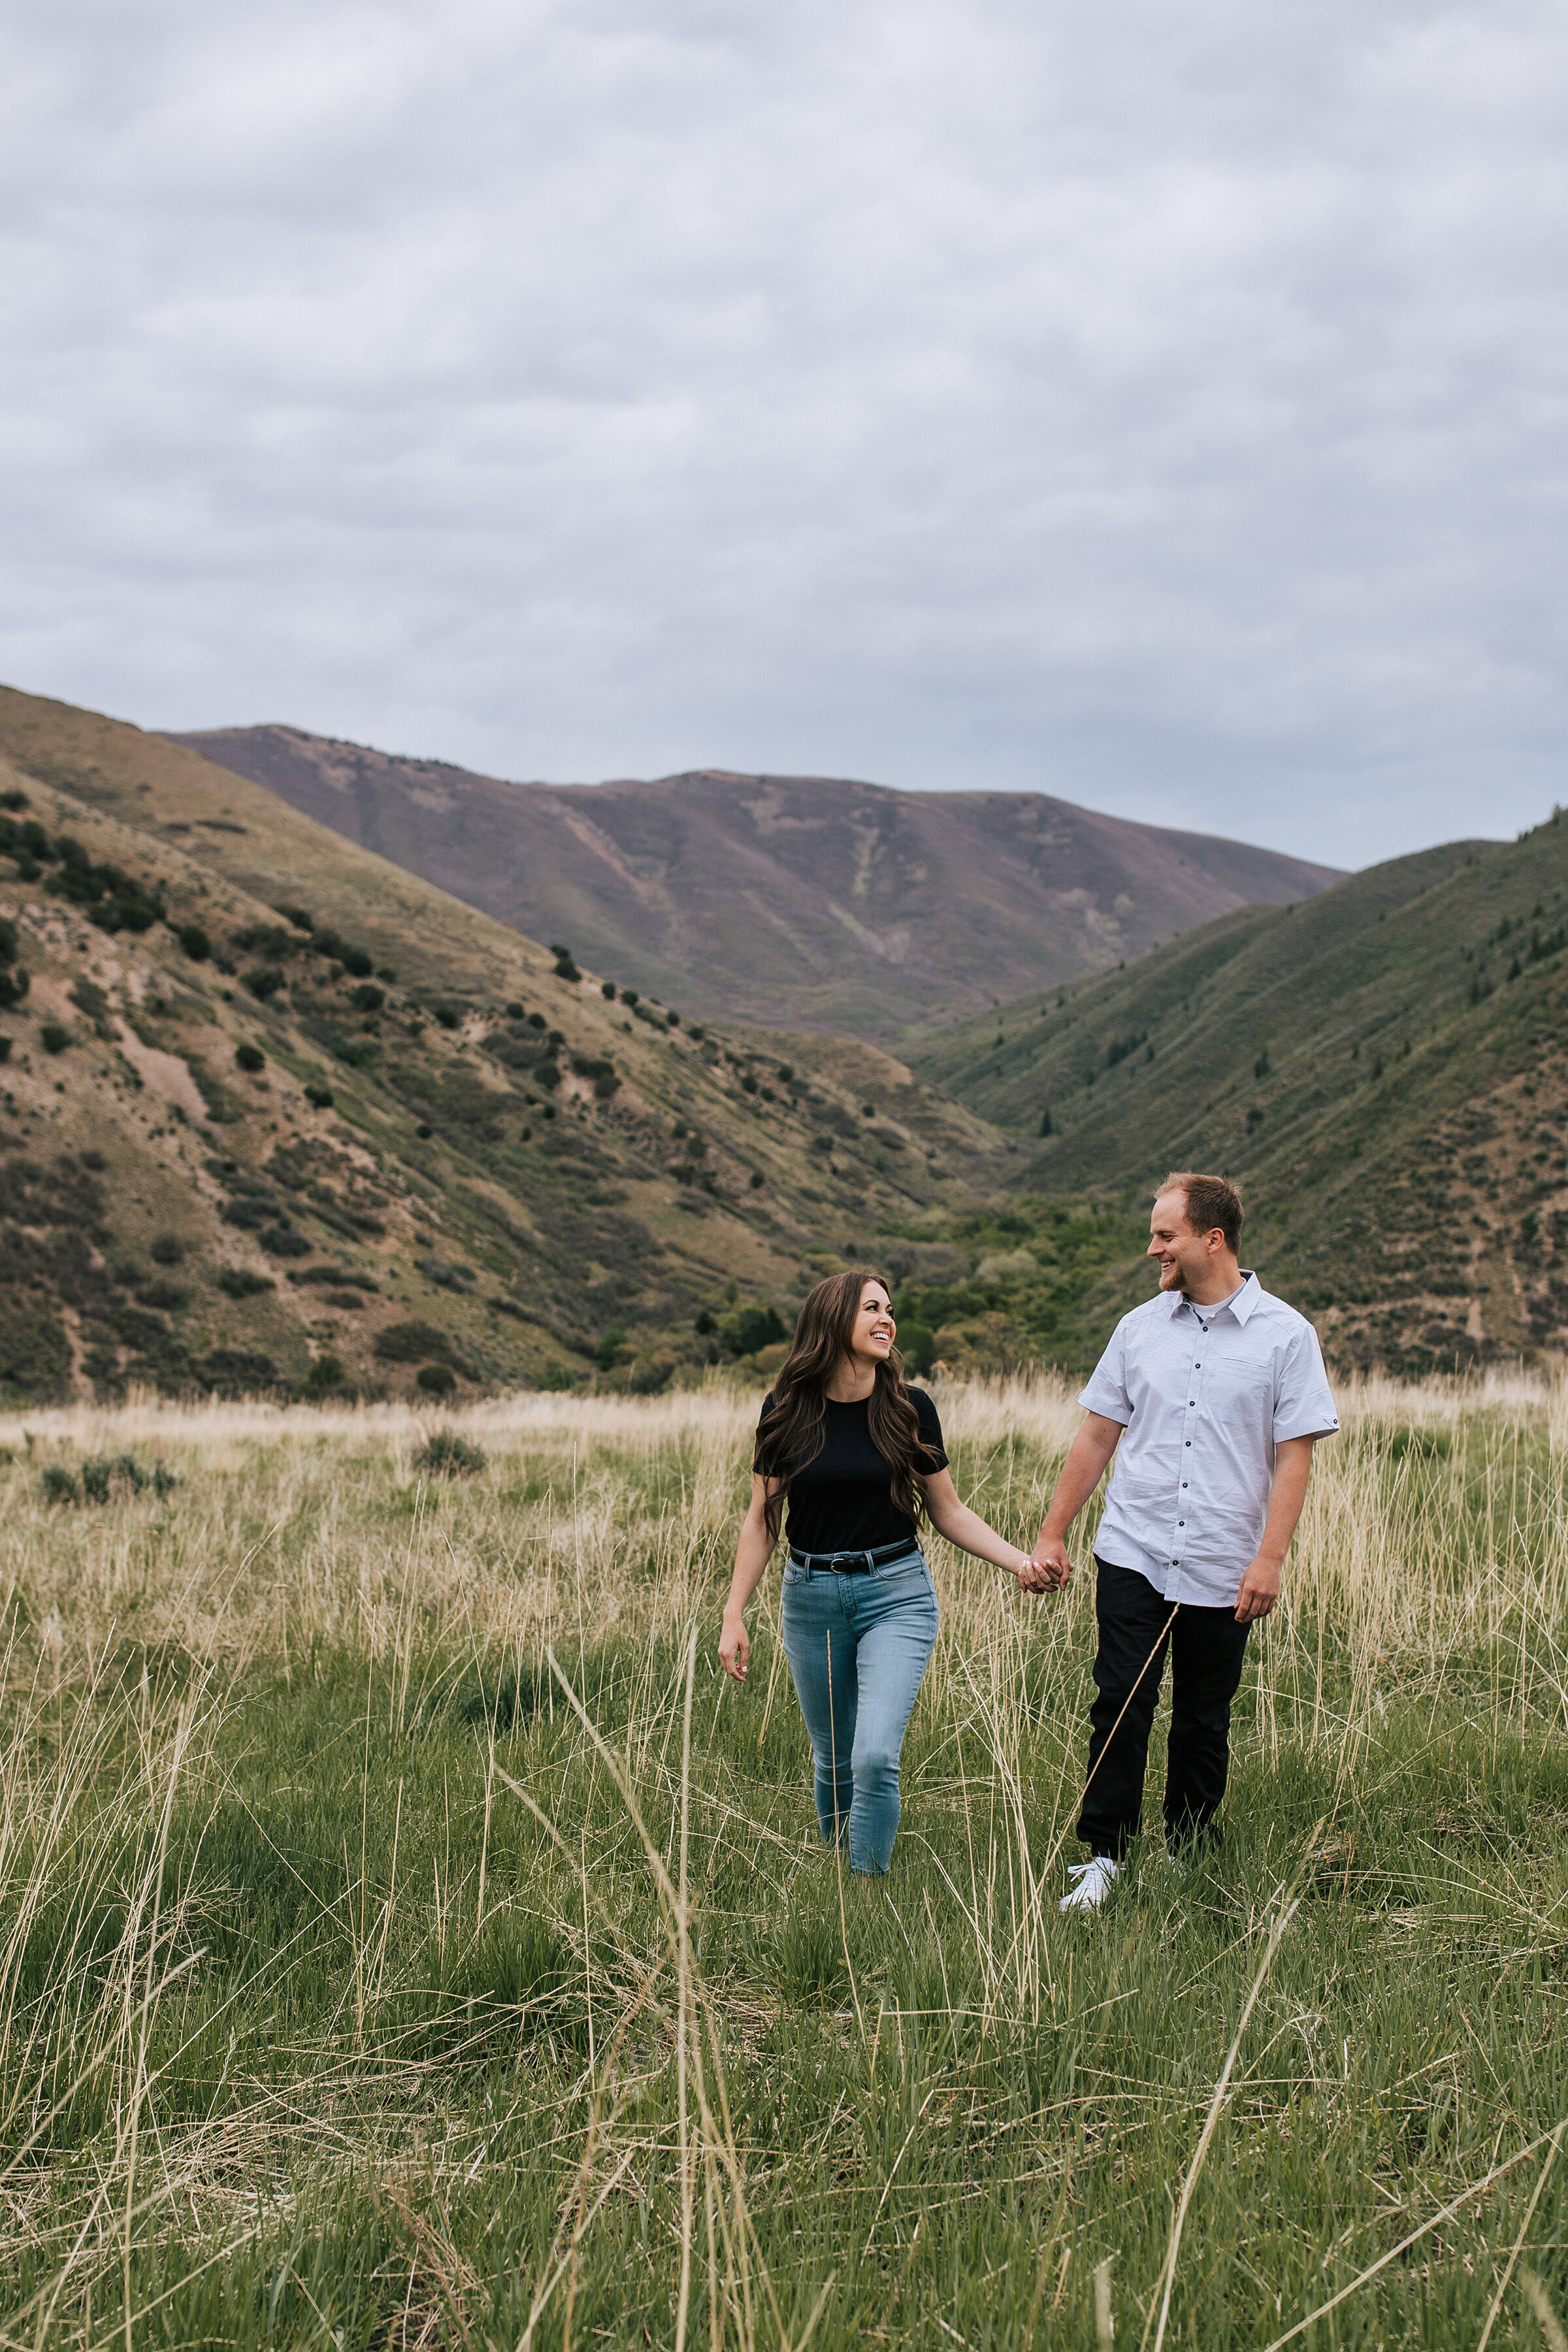  A beautiful couple walk through a grassy field in the mountains in a stunning honeymoon styled couples shoot by Emily Jenkins Photography. Couple goals walking couple pose inspiration ideas and goals client attire inspiration outdoor photo shoot loc